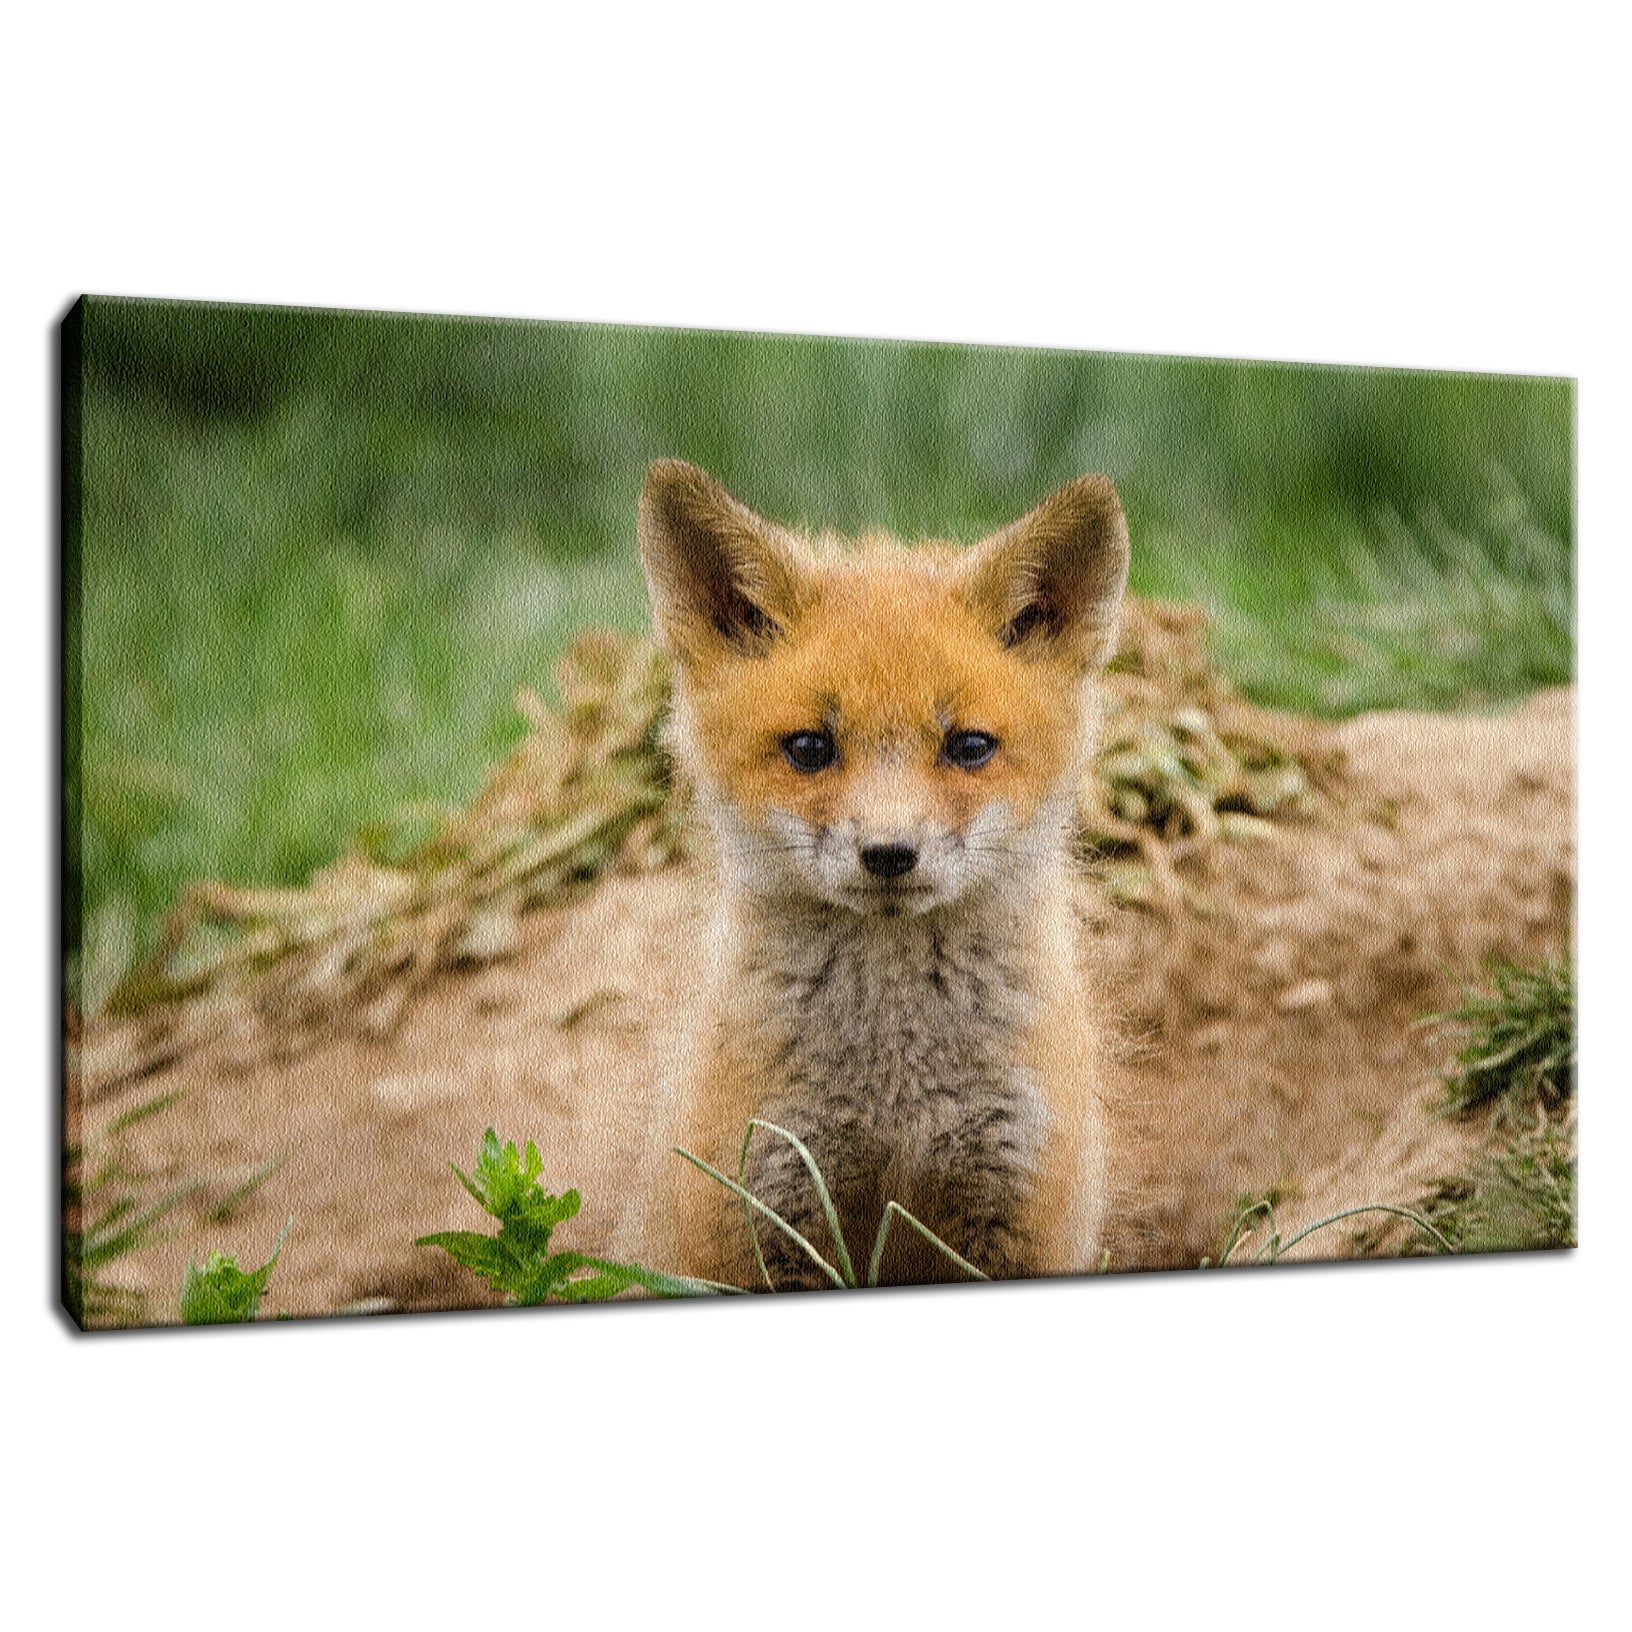 Coming Out Animal / Wildlife Photograph Fine Art Canvas & Unframed Wall Art Prints  - PIPAFINEART